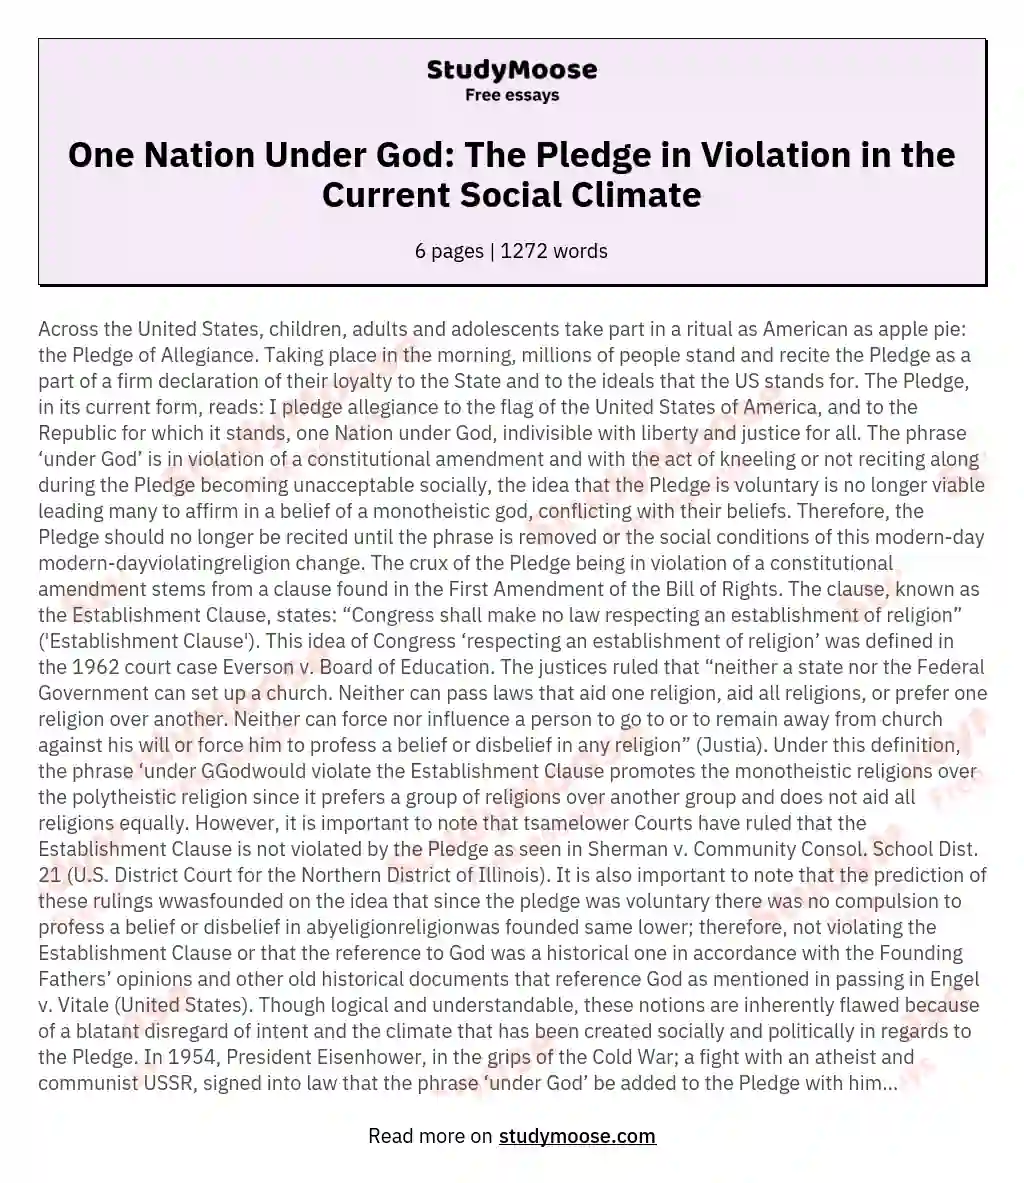 One Nation Under God: The Pledge in Violation in the Current Social Climate essay